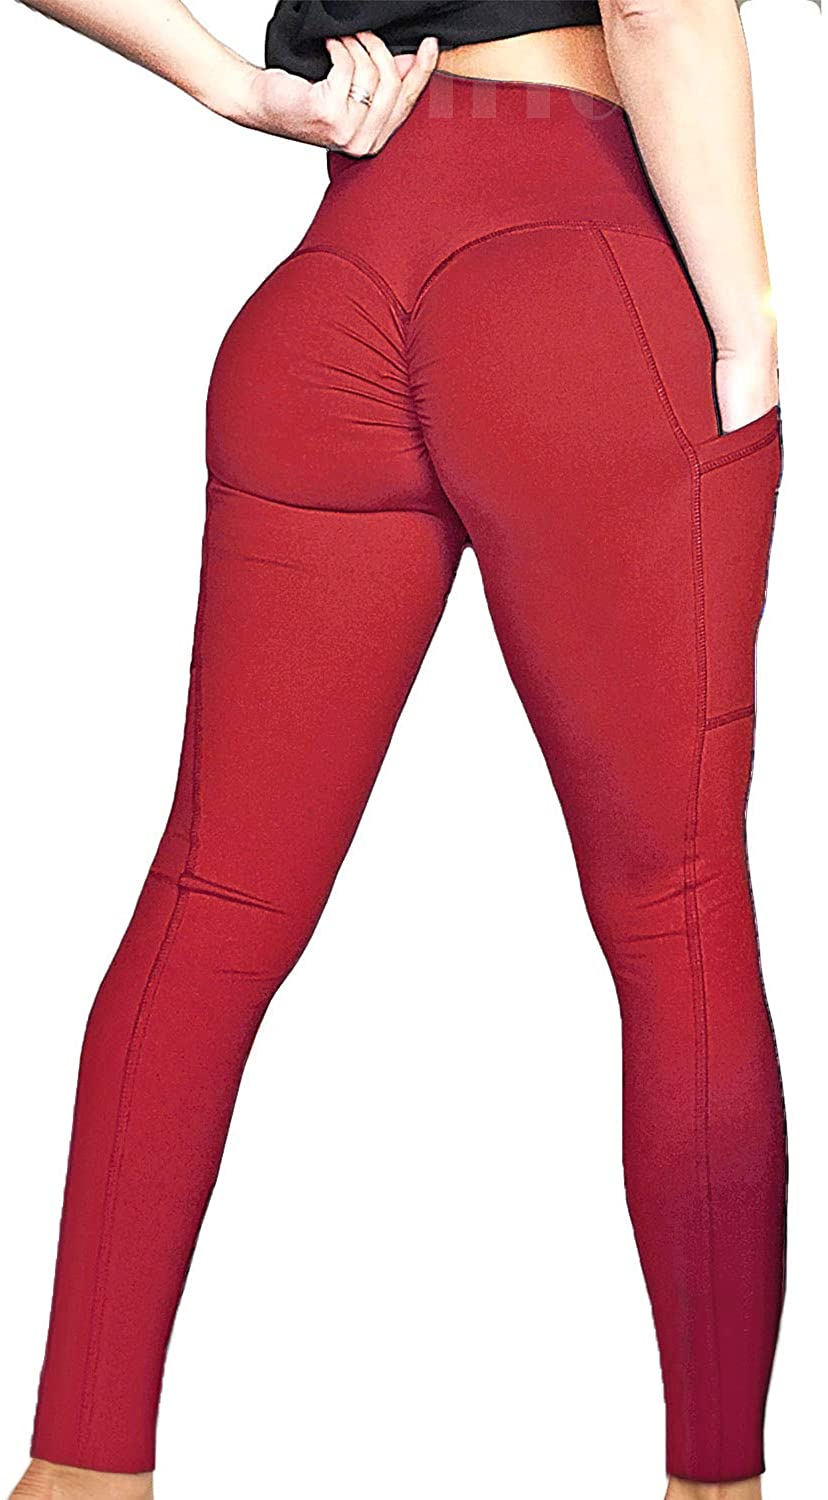 High waisted red leggings/made to order/sexy leggings/active  wear/yoga/bohemian chic/festival clothing/women /elastic pants/tribal fusion